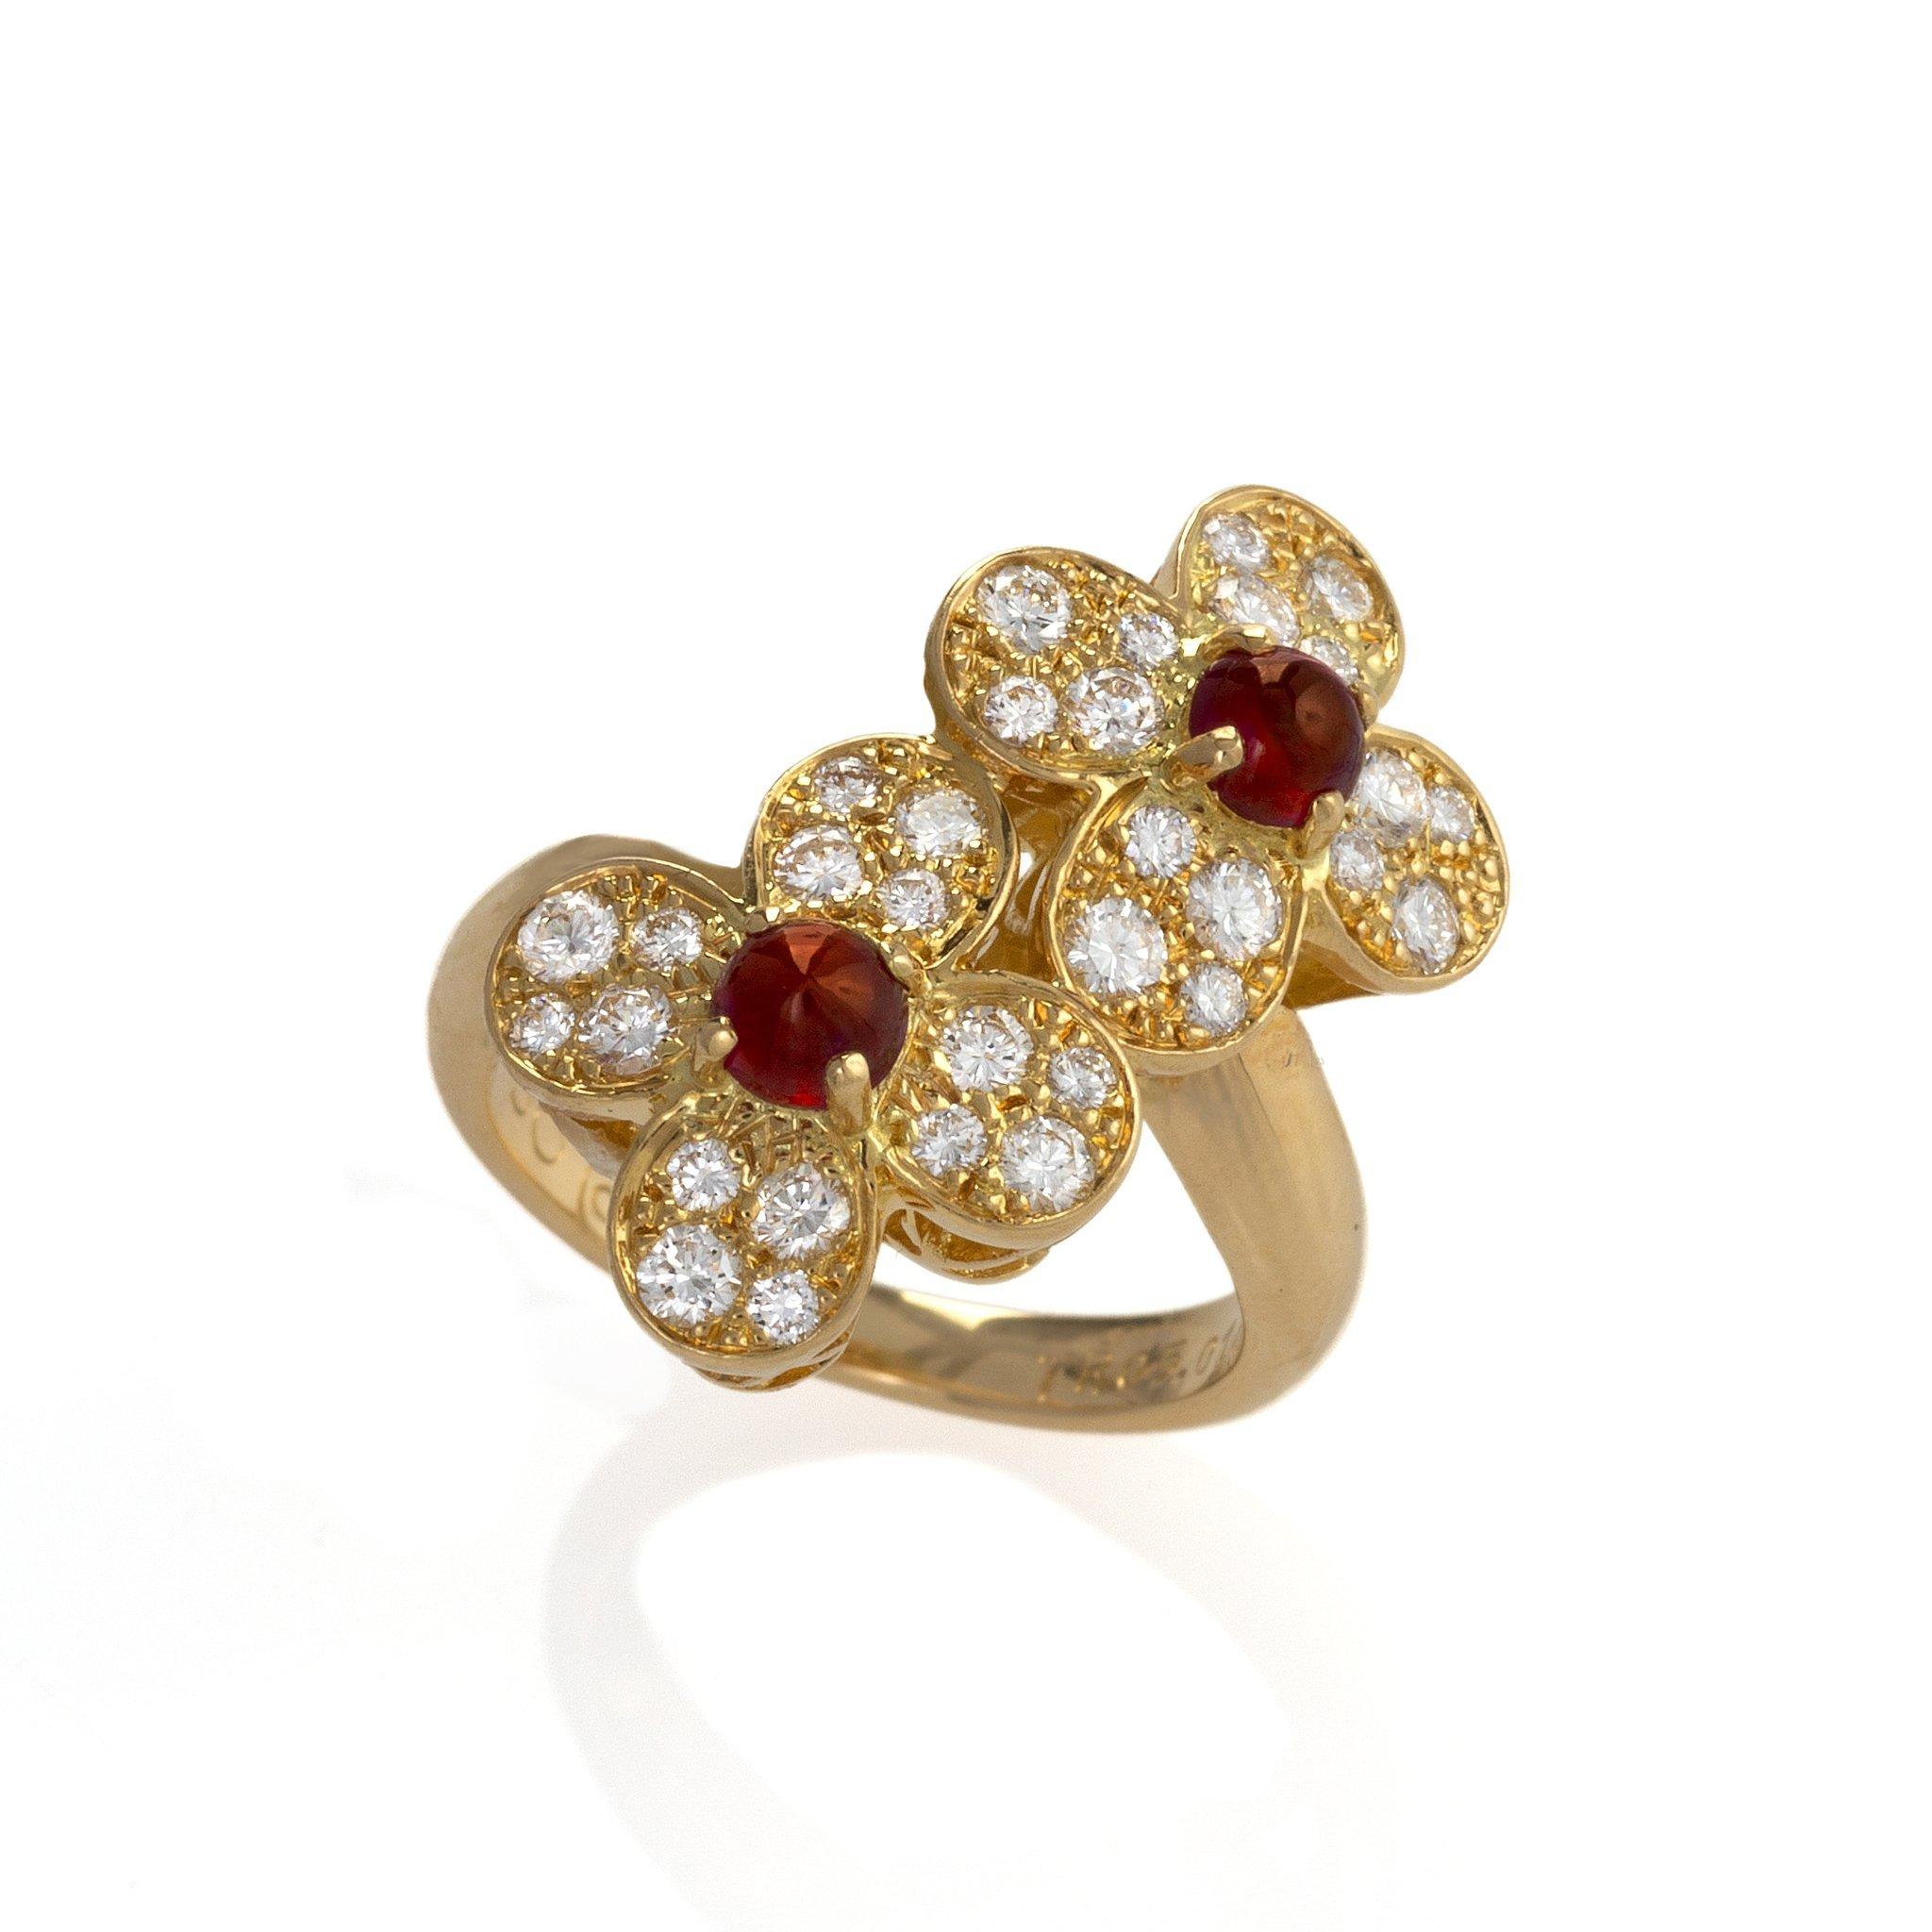 Created by Van Cleef & Arpels, this “Trefle” ring is composed of cabochon rubies and diamonds. The bypass form ring is designed as two pave-set diamond blossoms, each centering a cabochon ruby. This unusual twin-flower Trefle ring with its ruby